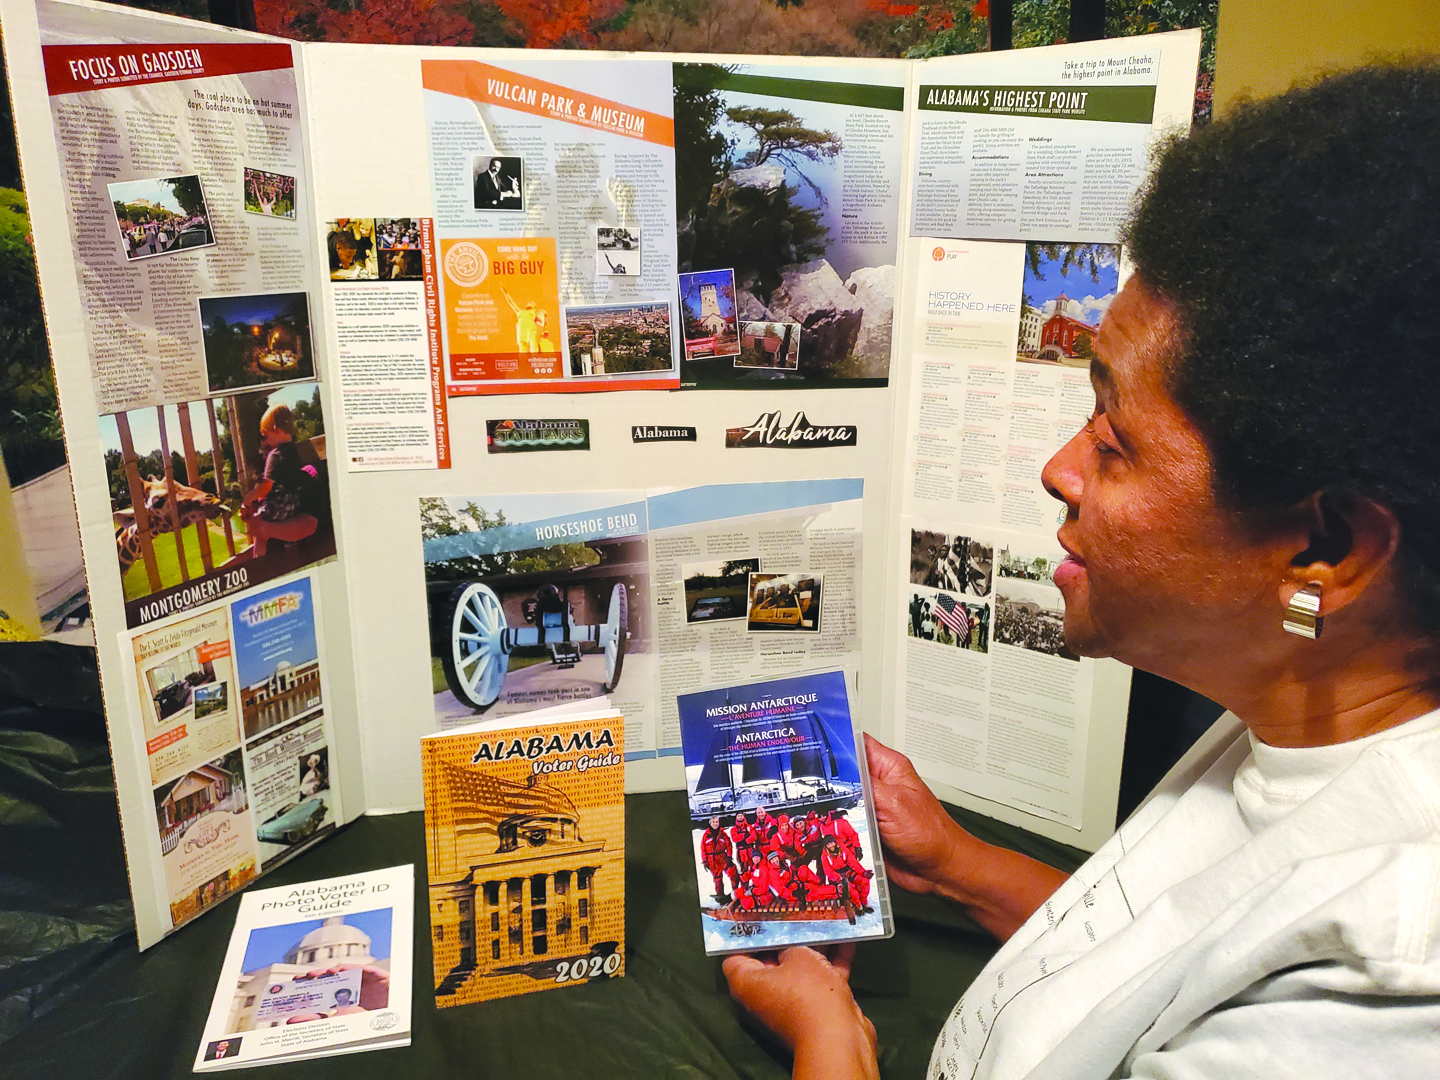 Lee County resident to showcase Alabama travels in museum display exhibit on March 5 and 6